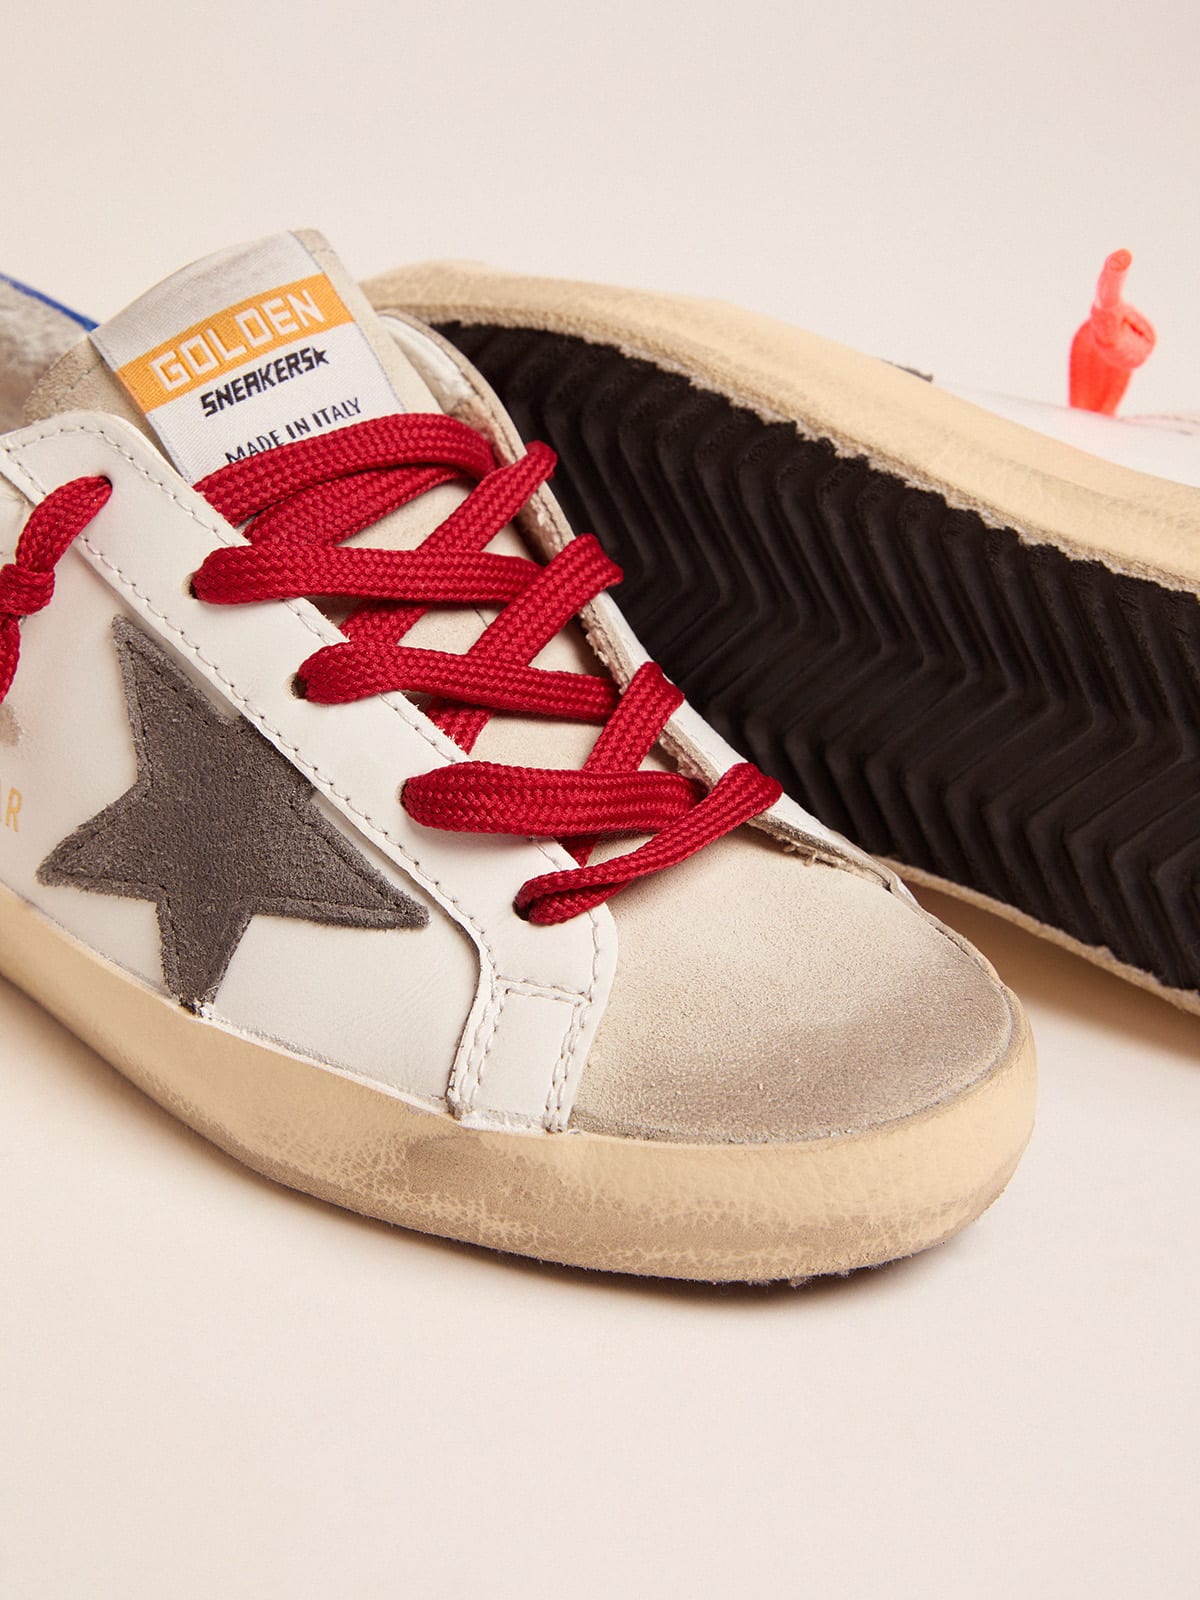 Golden Goose - Young Super-Star sneakers with blue heel tab and red laces in 